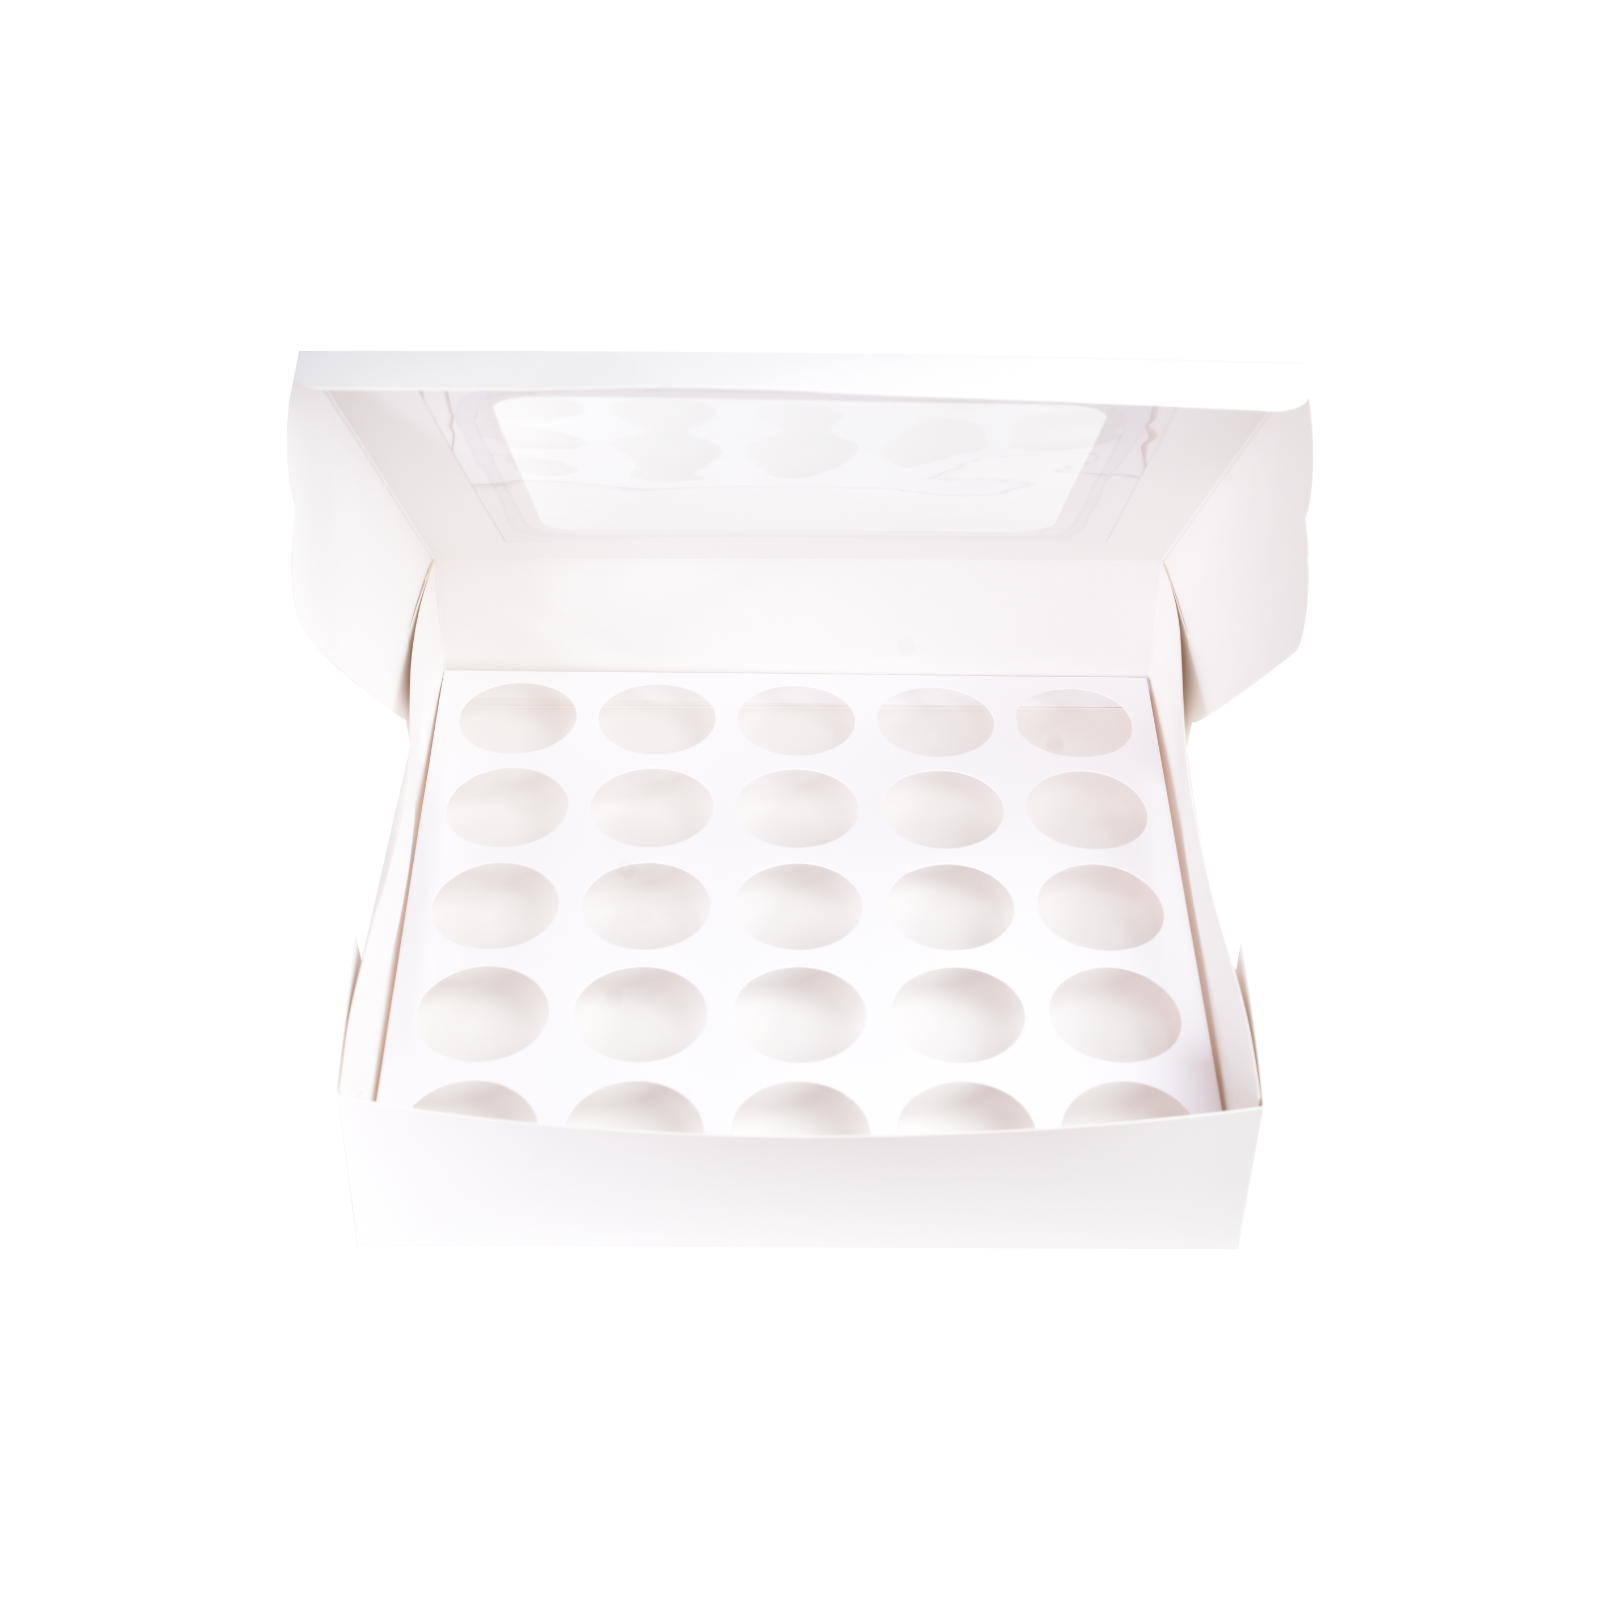 25h cup cake box white 3.png